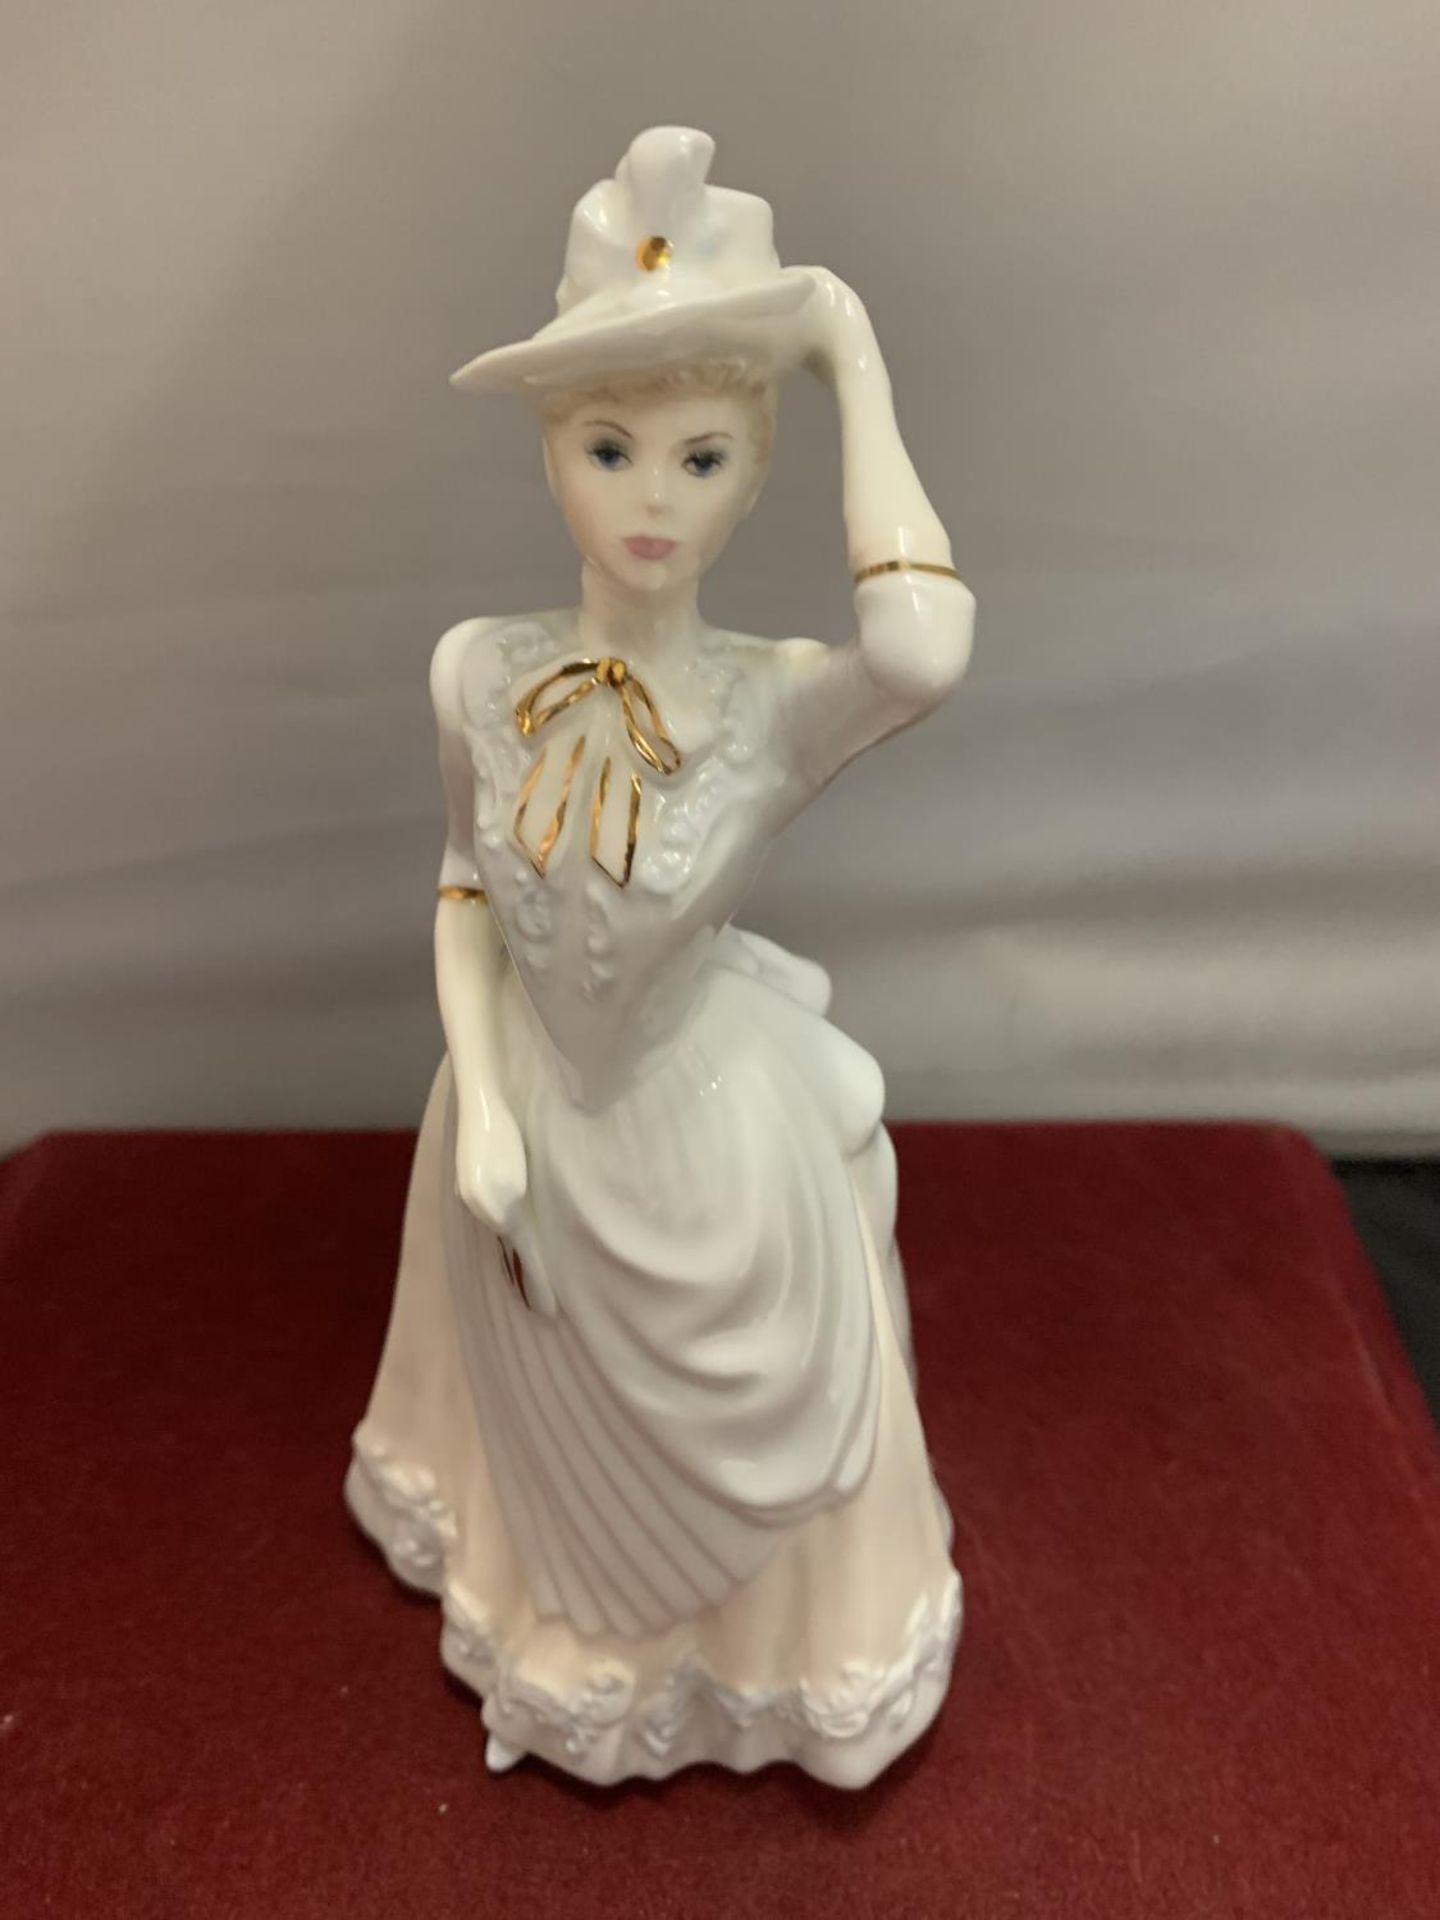 TWO COALPORT FIGURINES TO INCLUDE LADIES OF FASHION FIGURINES EMMA JANE AND CHANITILLY LACE DIGNITY - Image 3 of 4